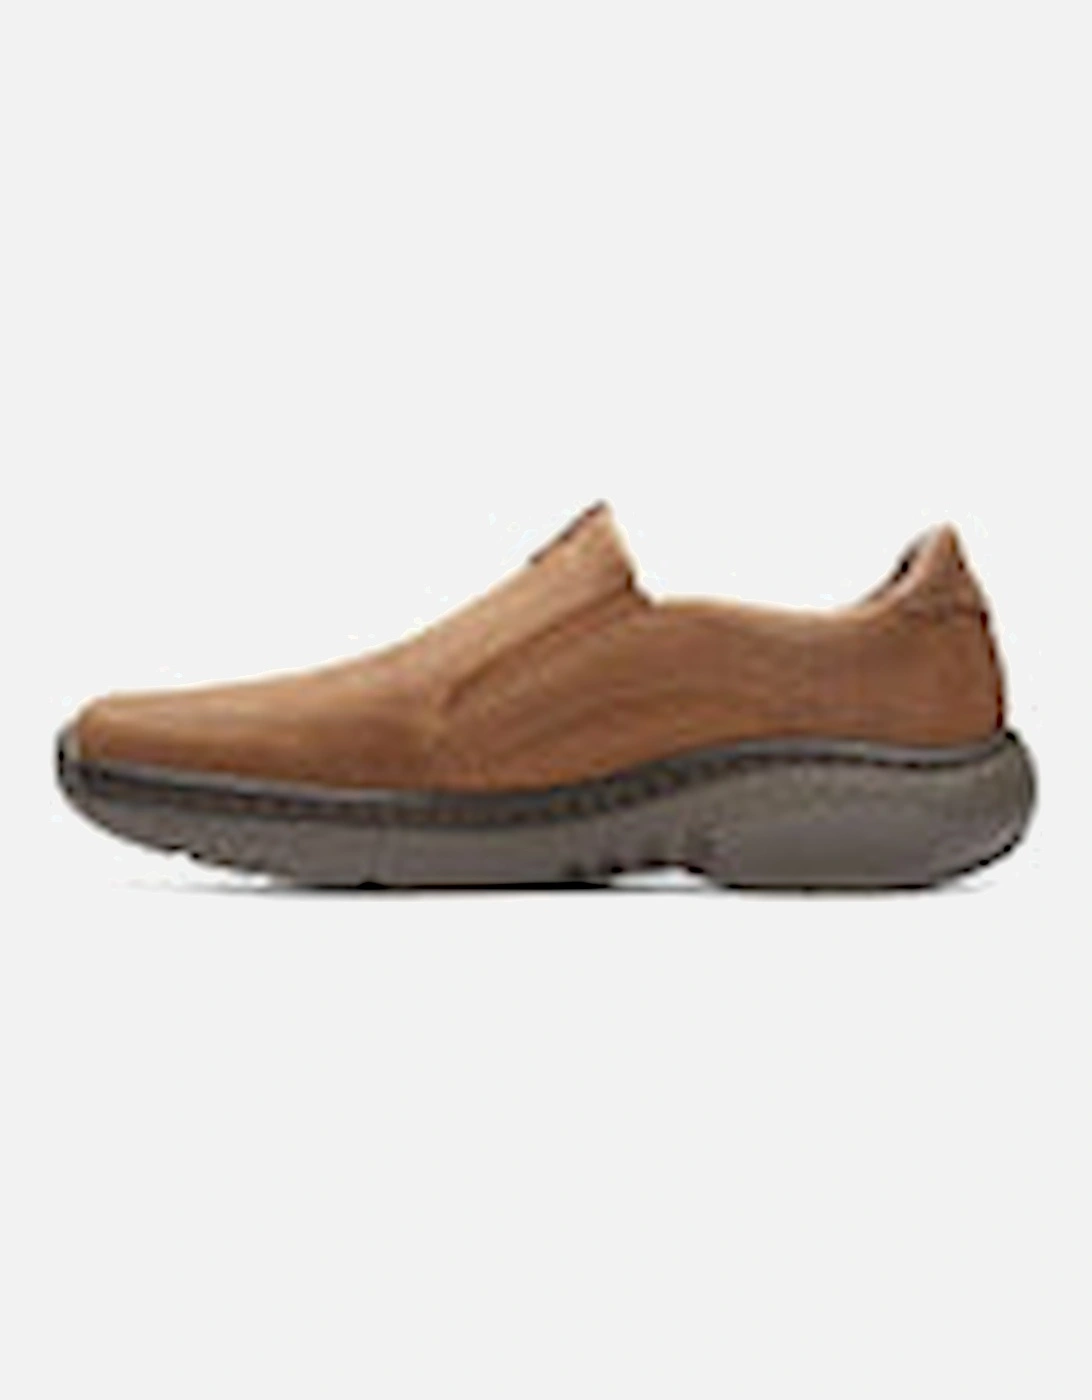 Mens slip on shoe Clarkspro Step in Beeswax Leather